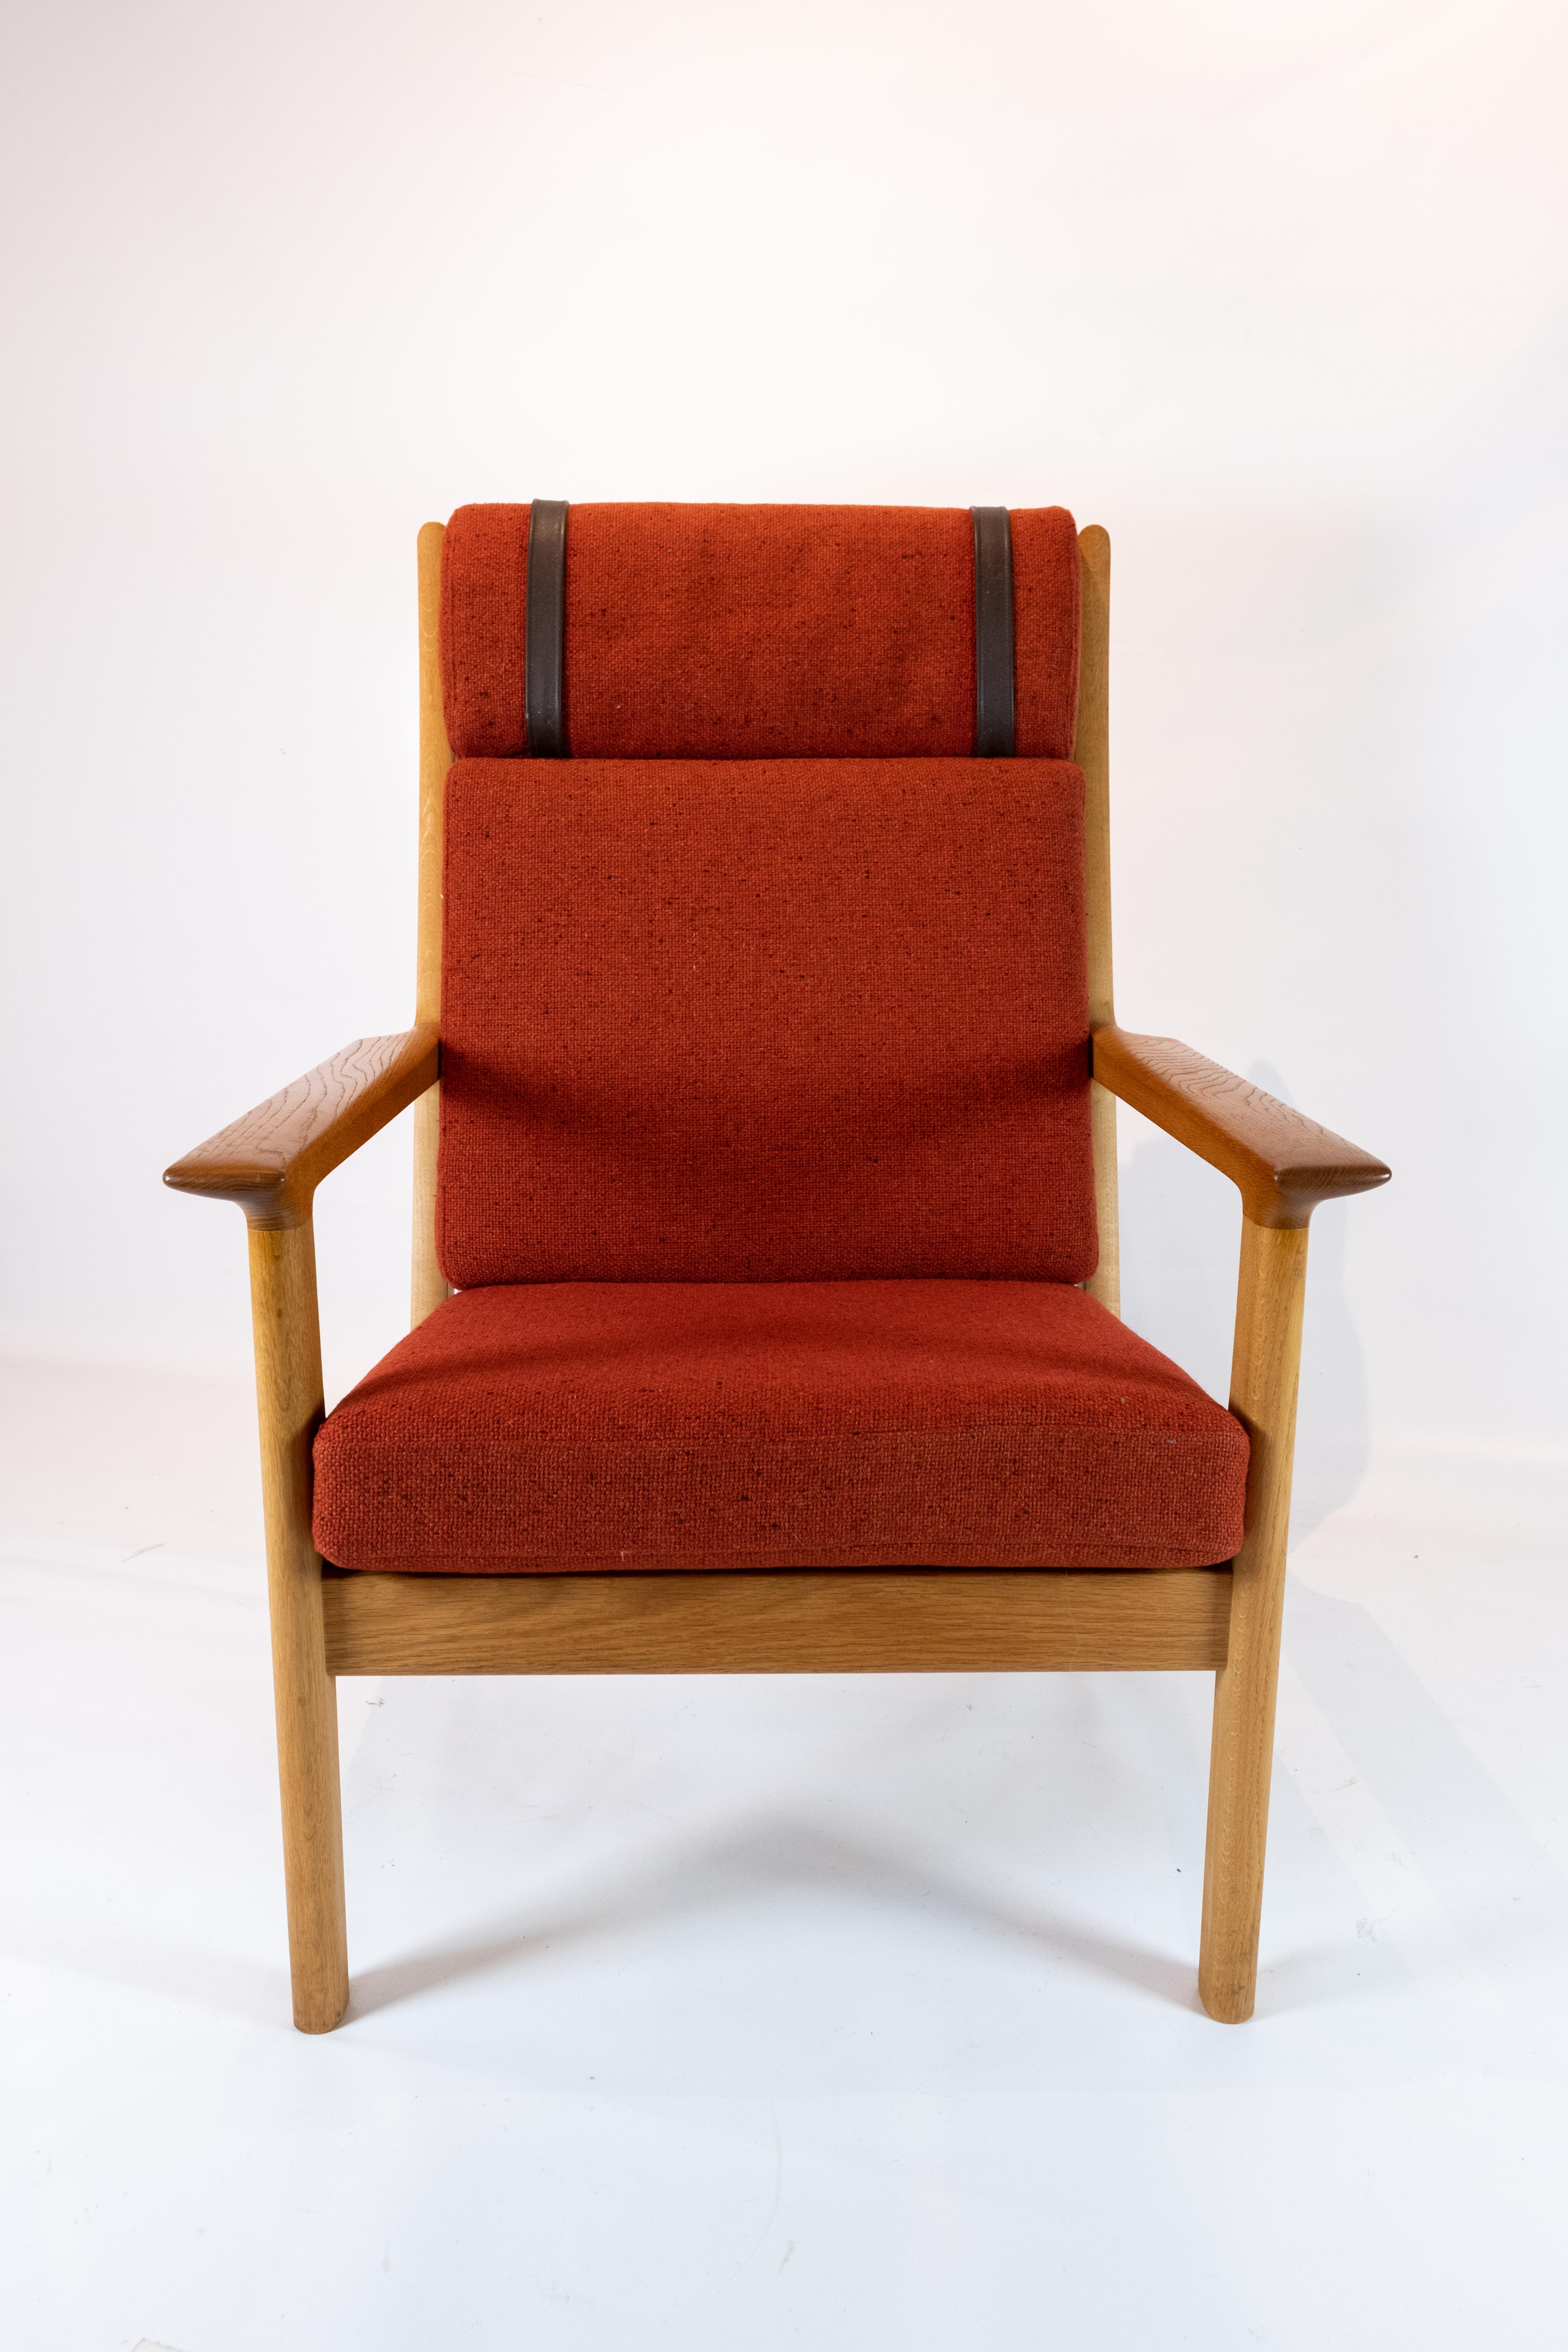 This tall easy chair, designed by the renowned Hans J. Wegner and meticulously crafted by GETAMA in the 1960s, epitomizes the elegance and comfort of Scandinavian design. Crafted from solid oak and upholstered in vibrant red wool fabric, it exudes